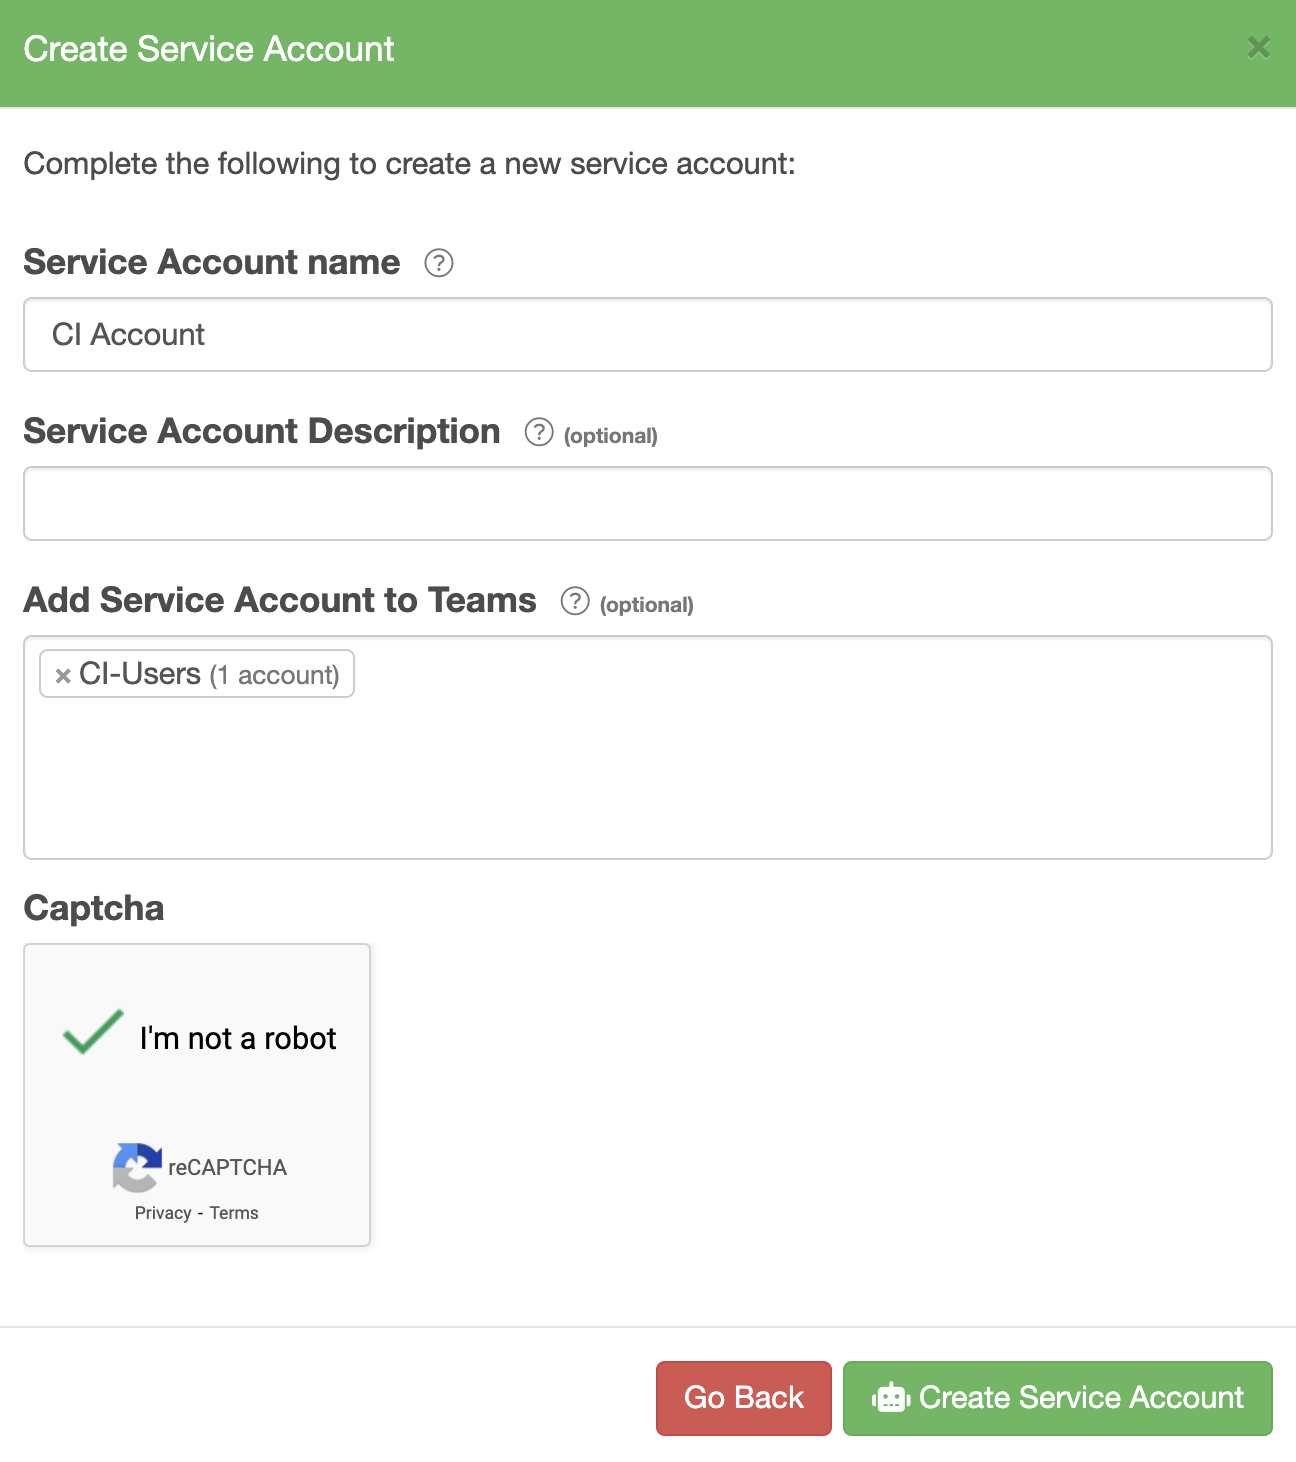 Service Account Creation Form